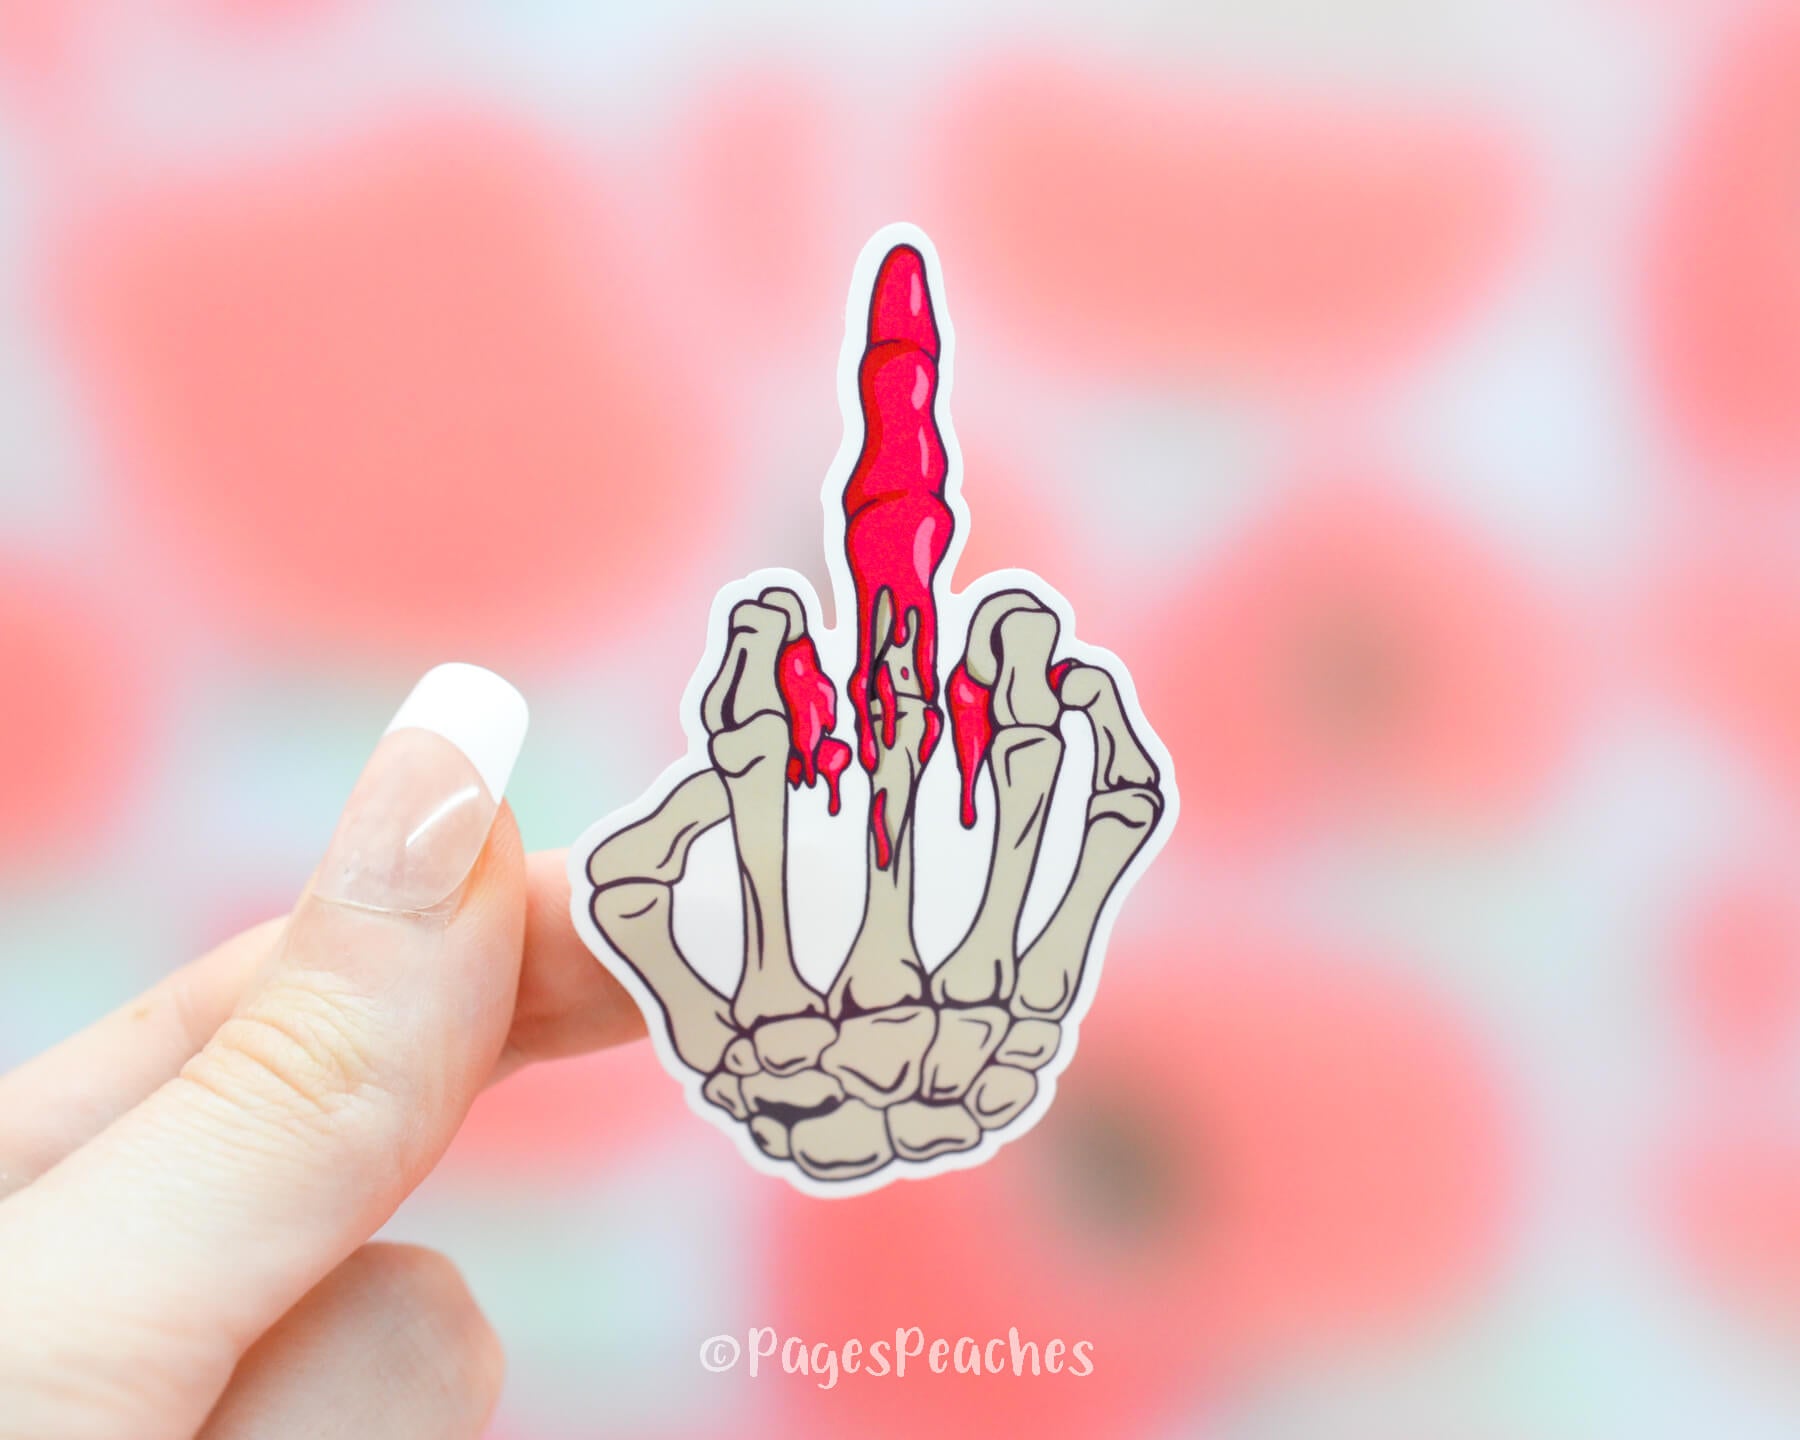 Sticker of a skeleton hand flipping off saying Fuck you with a bloody middle finger